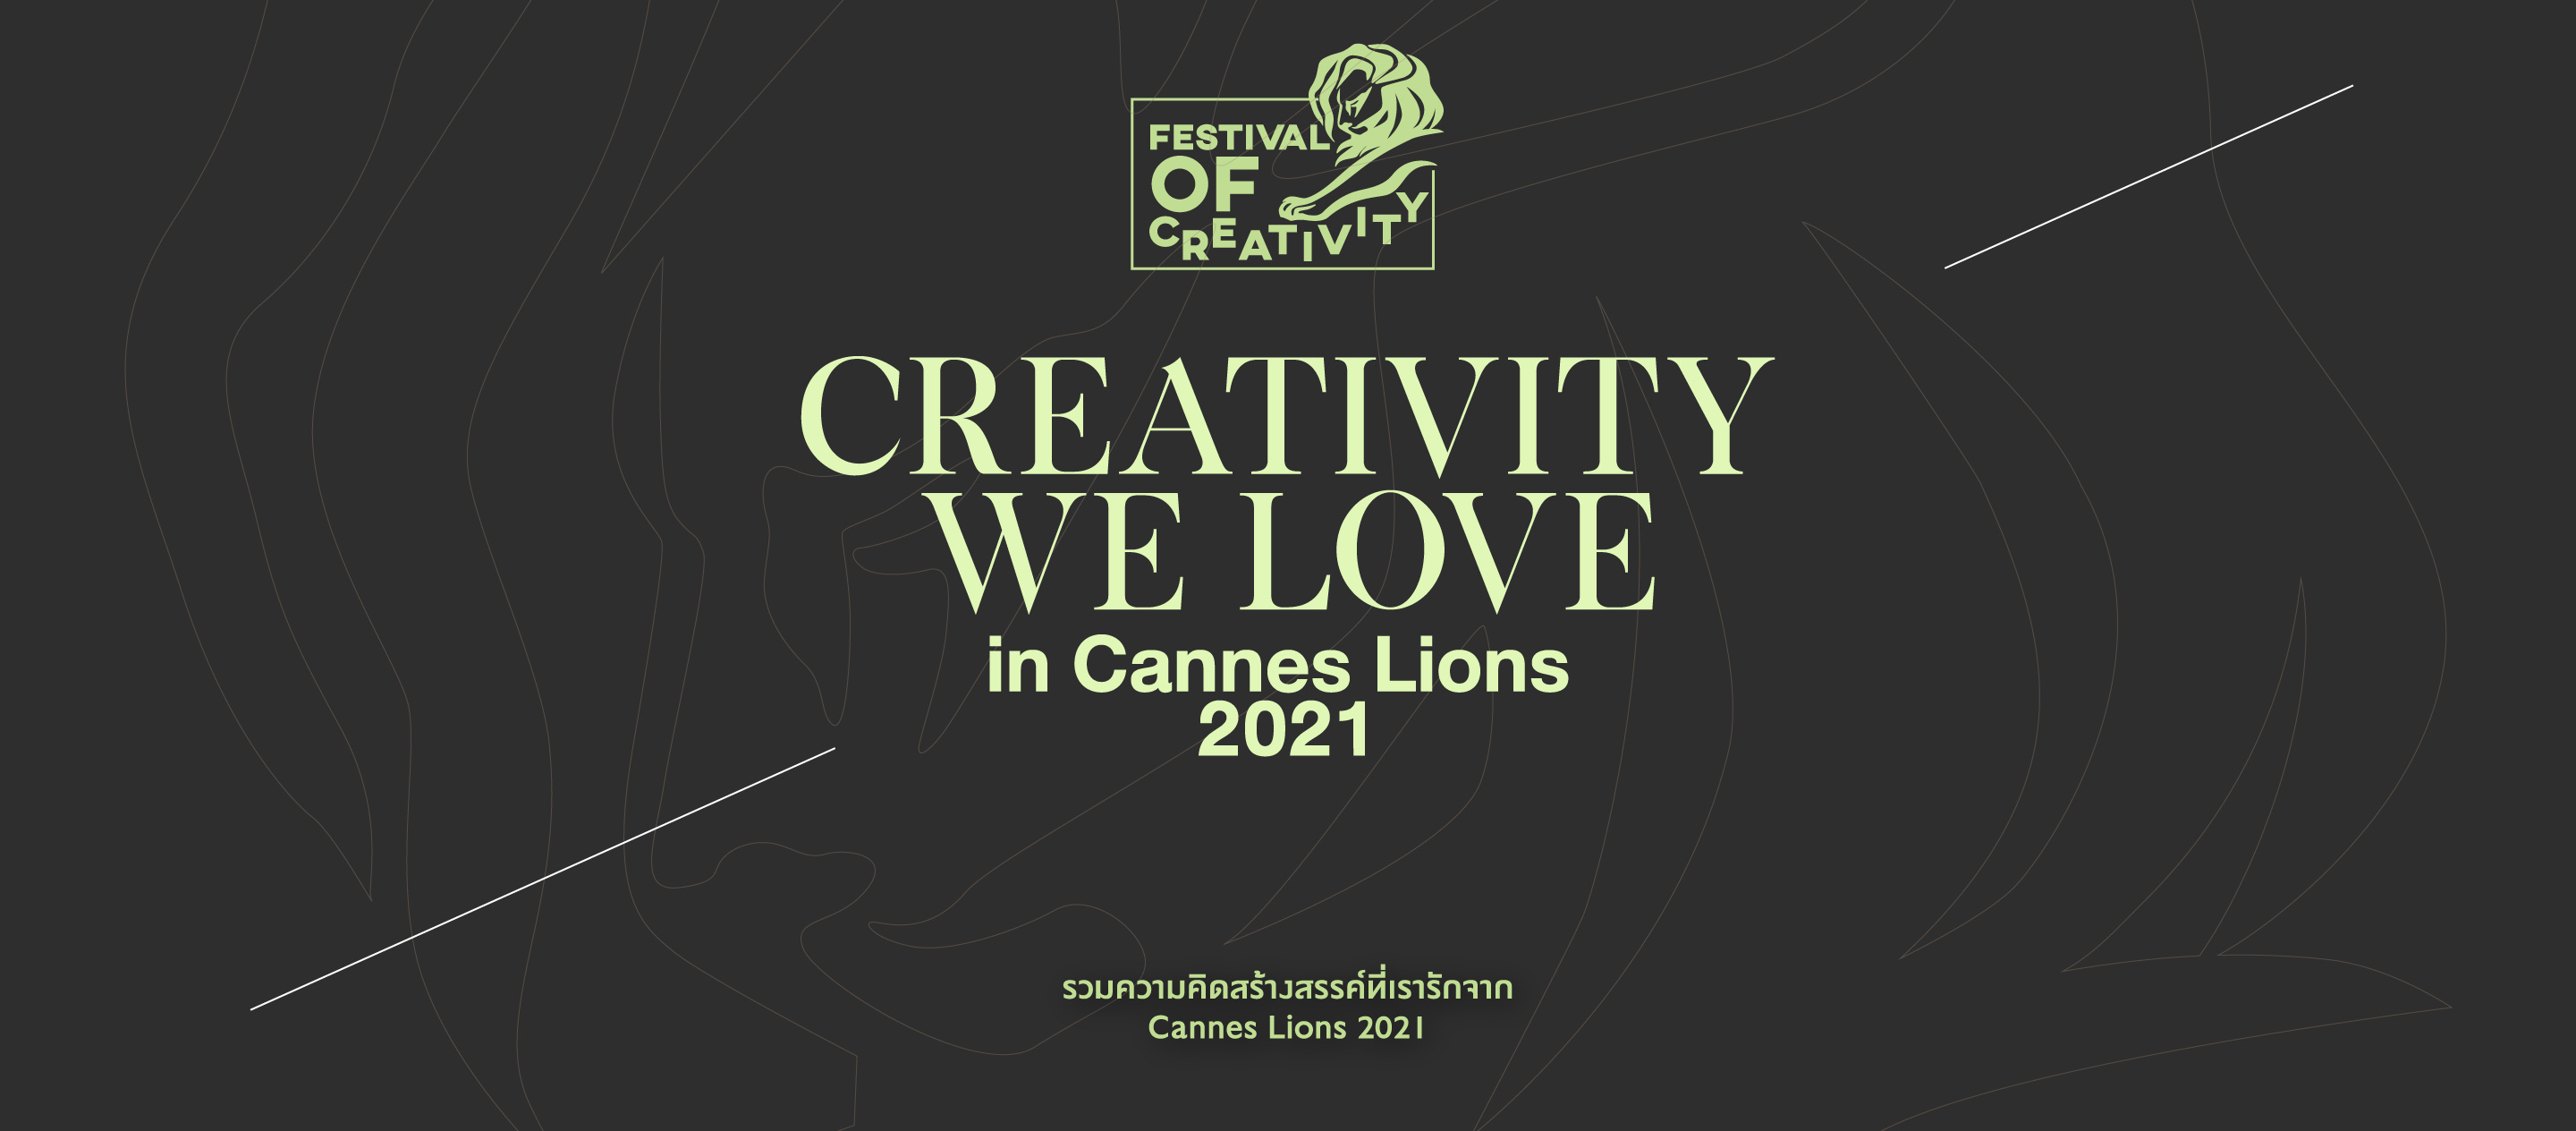 Creativity we love in Cannes Lions 2021